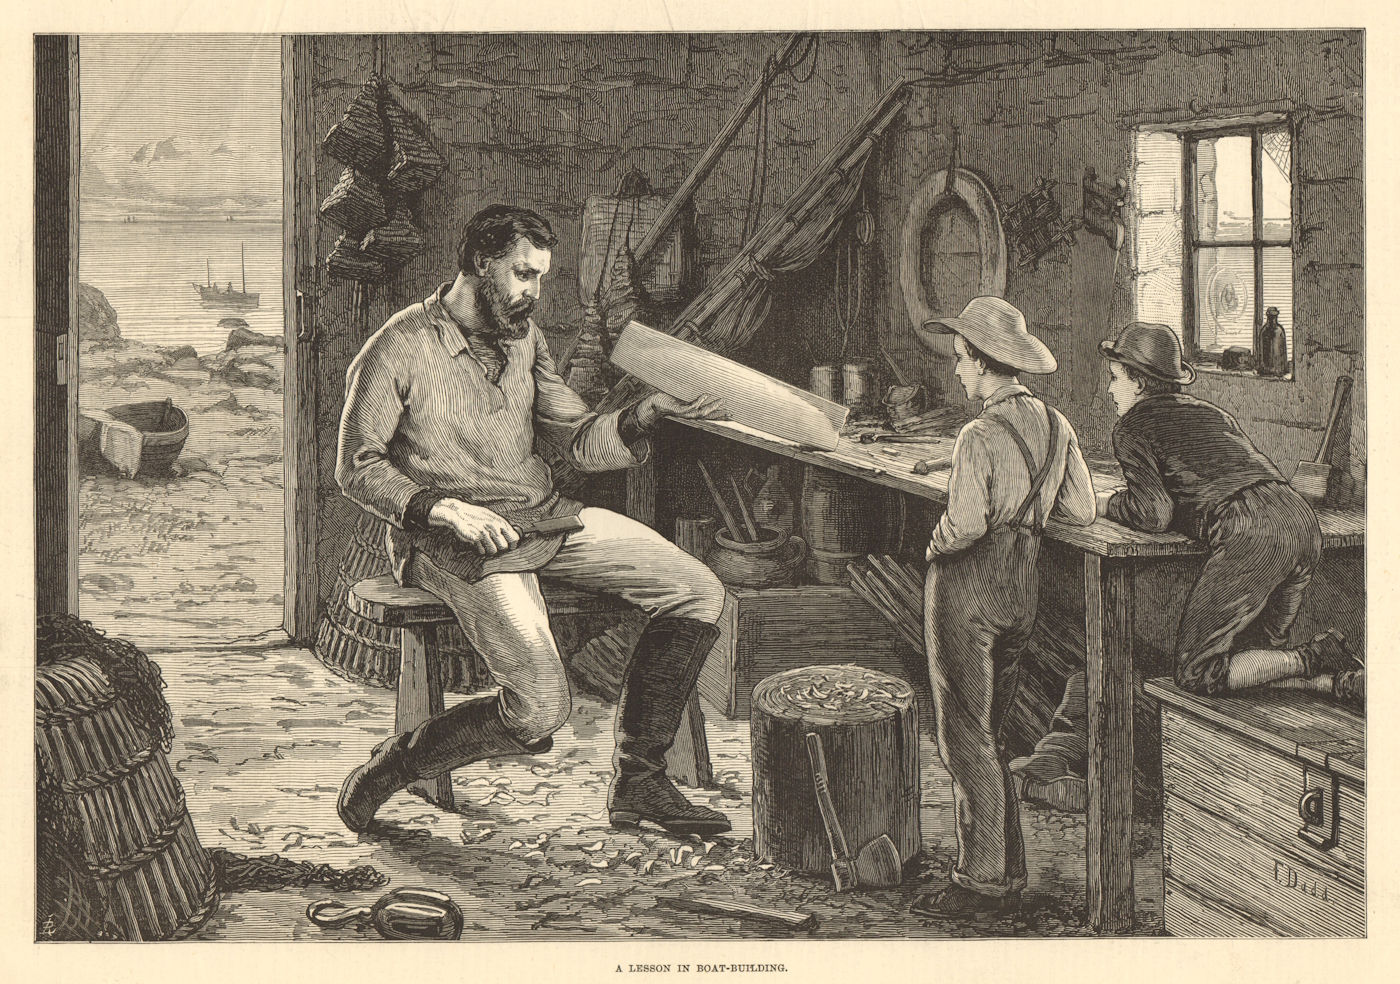 Associate Product A lesson in boat-building. Education 1877 antique ILN full page print